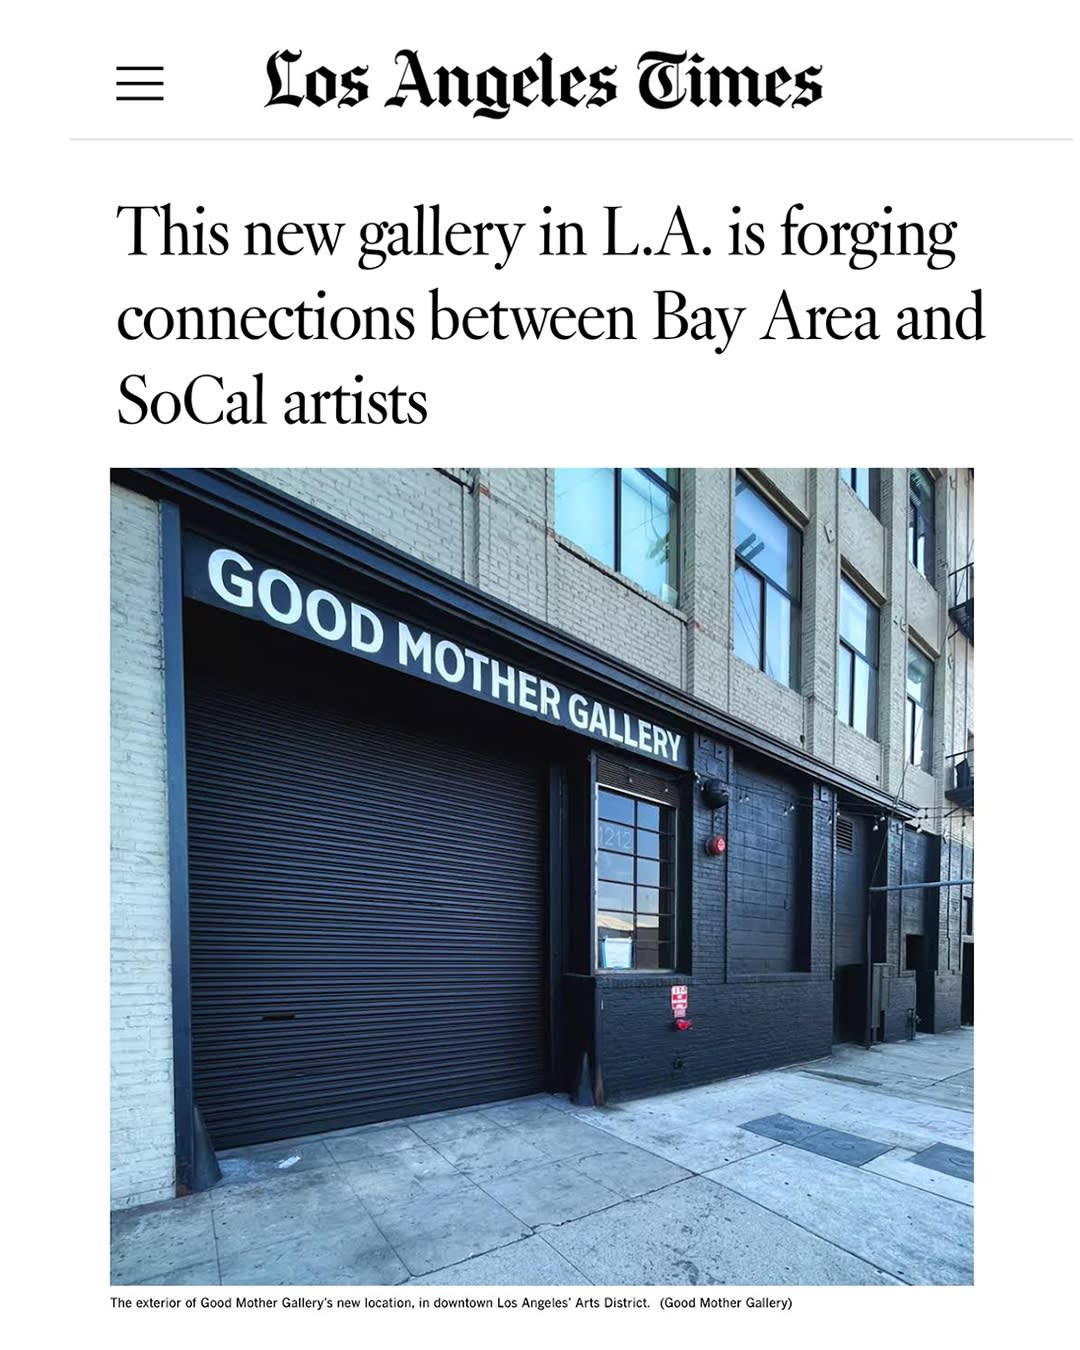 screenshot of an LA times article witha. picture of the front of Good Mother Gallery